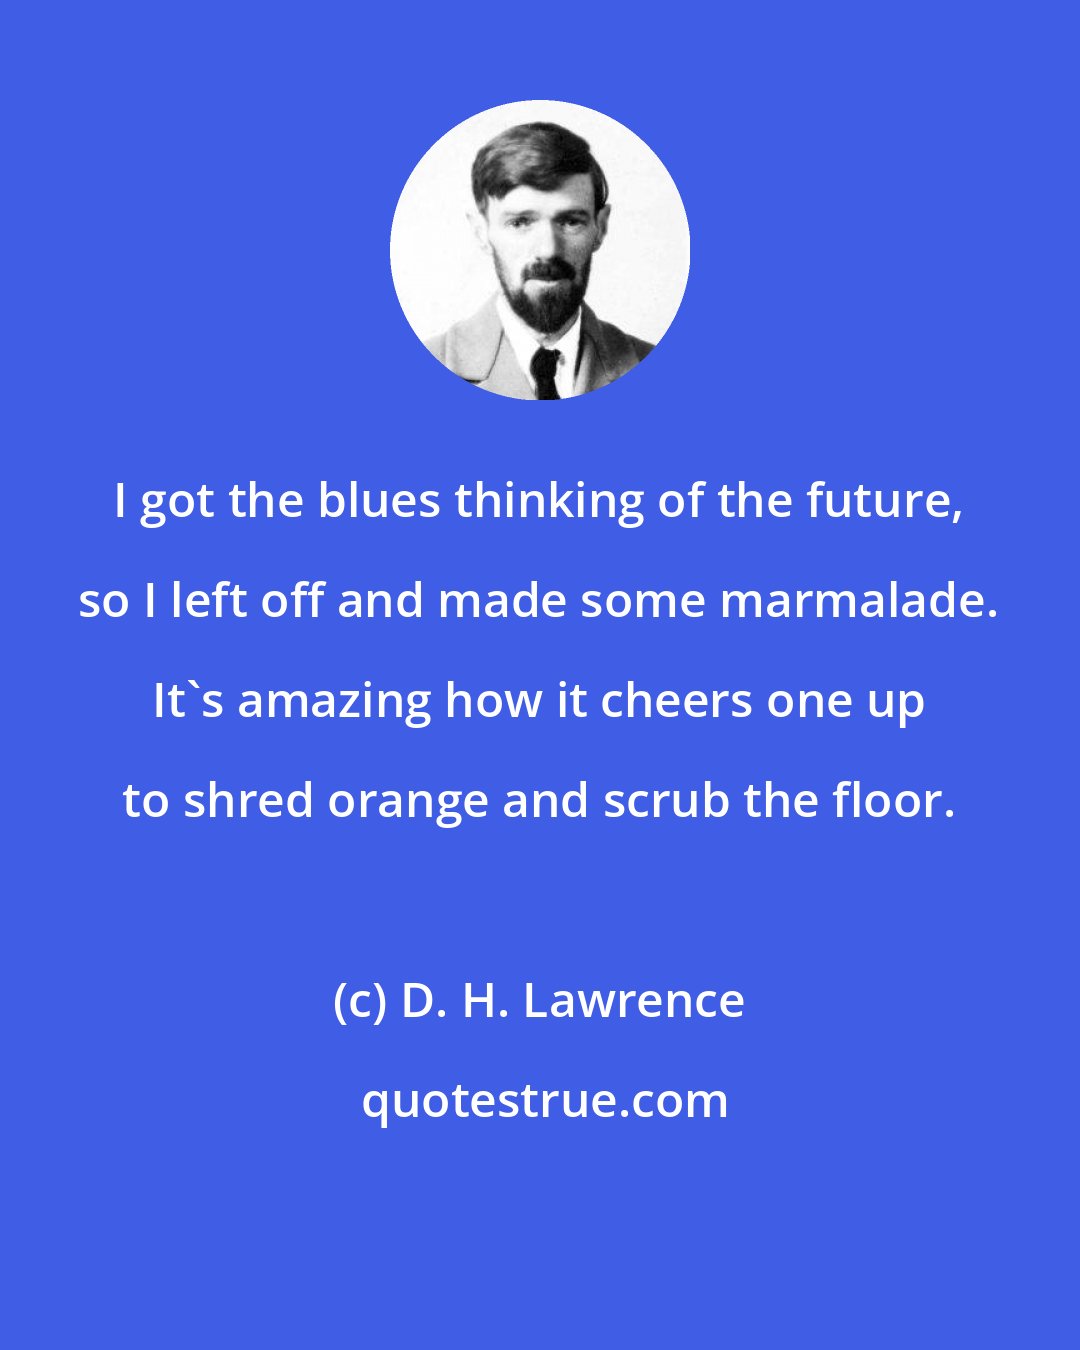 D. H. Lawrence: I got the blues thinking of the future, so I left off and made some marmalade. It's amazing how it cheers one up to shred orange and scrub the floor.